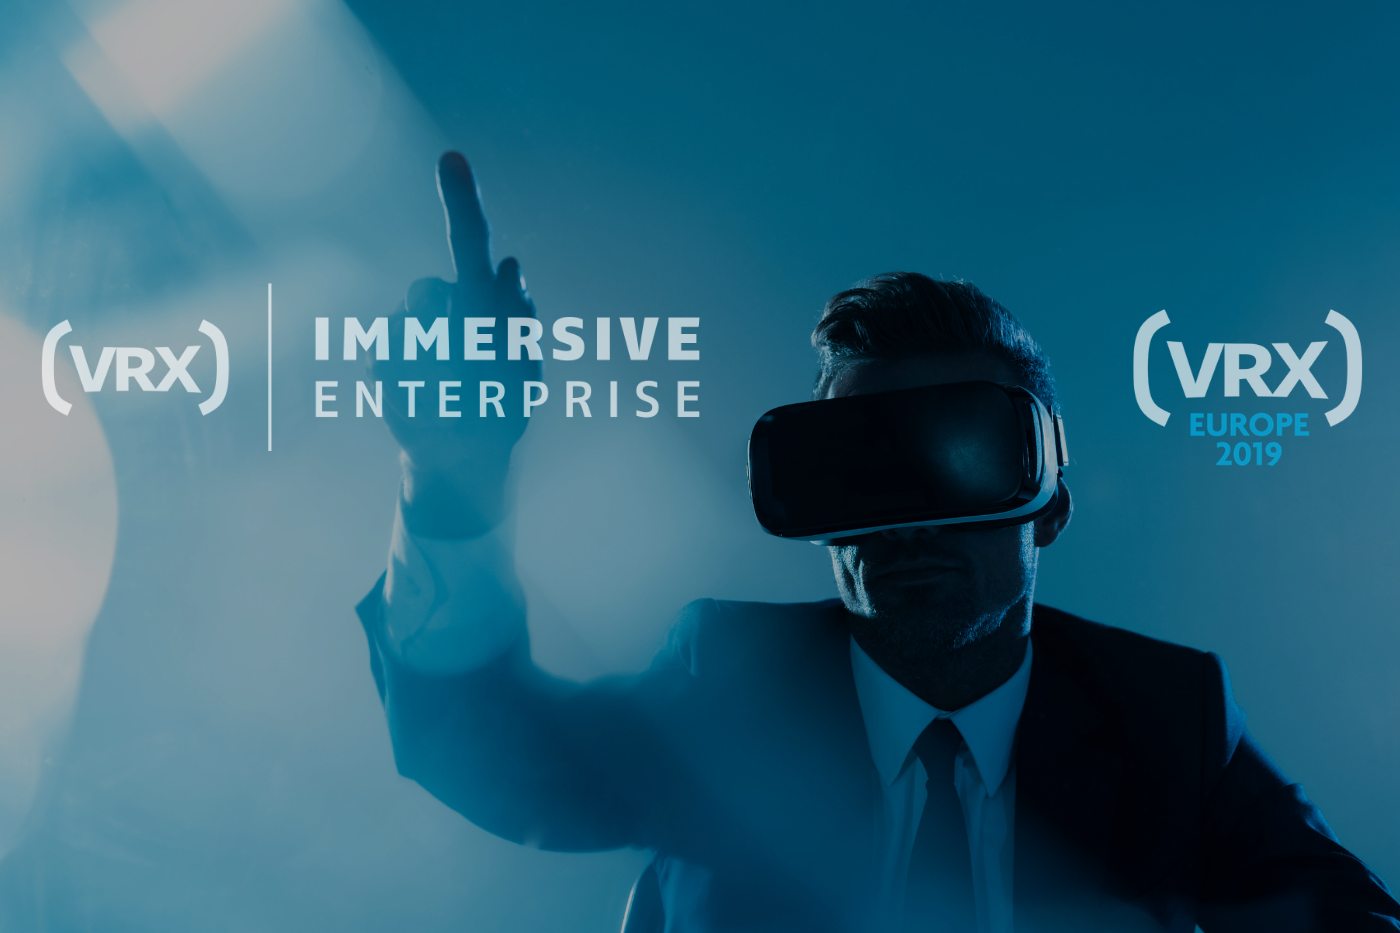 VR Intelligence Announces Top XR Industry Events in Europe and US - VRX Europe and VRX: Immersive Enterprise events